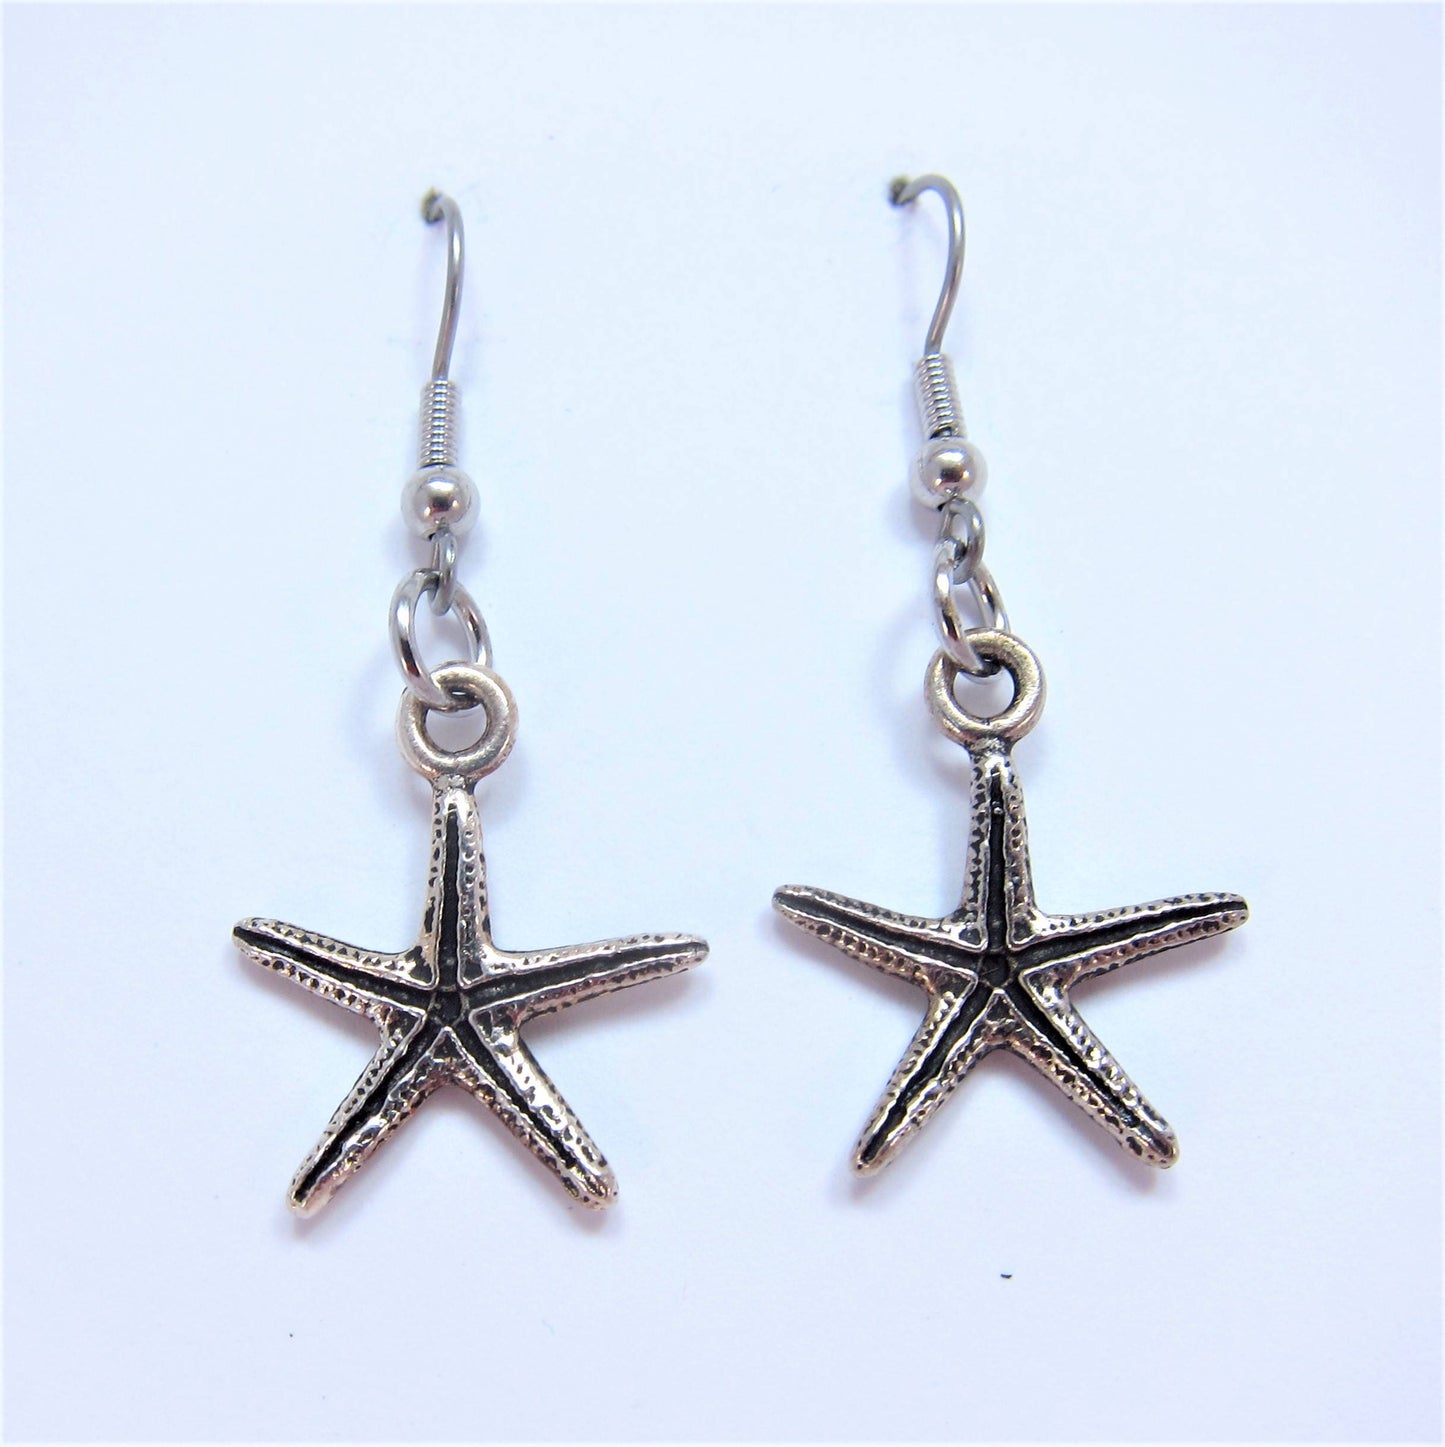 Charmed! Starfish / Sea star earrings silver plate antique finish on hypoallergenic surgical steel hooks